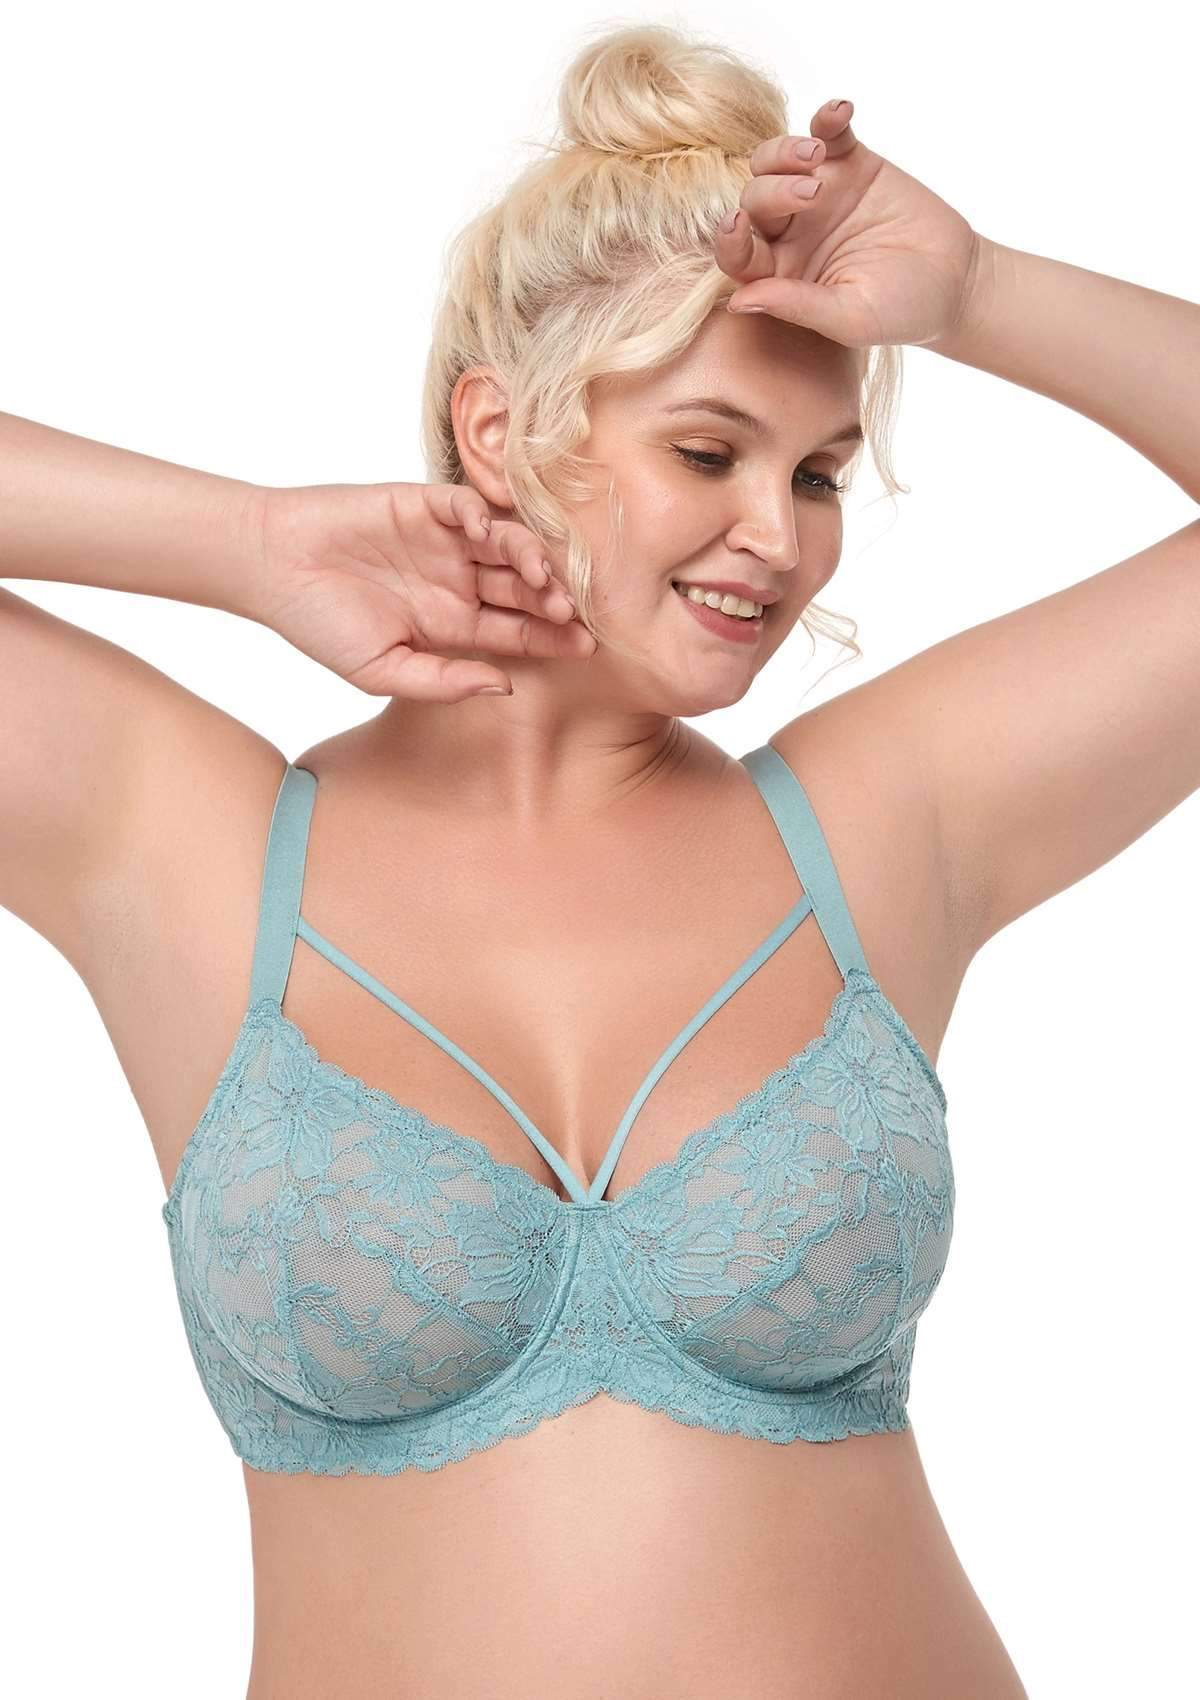 HSIA Pretty In Petals Unlined Lace Bra: Comfortable And Supportive Bra - Pewter Blue / 38 / DD/E